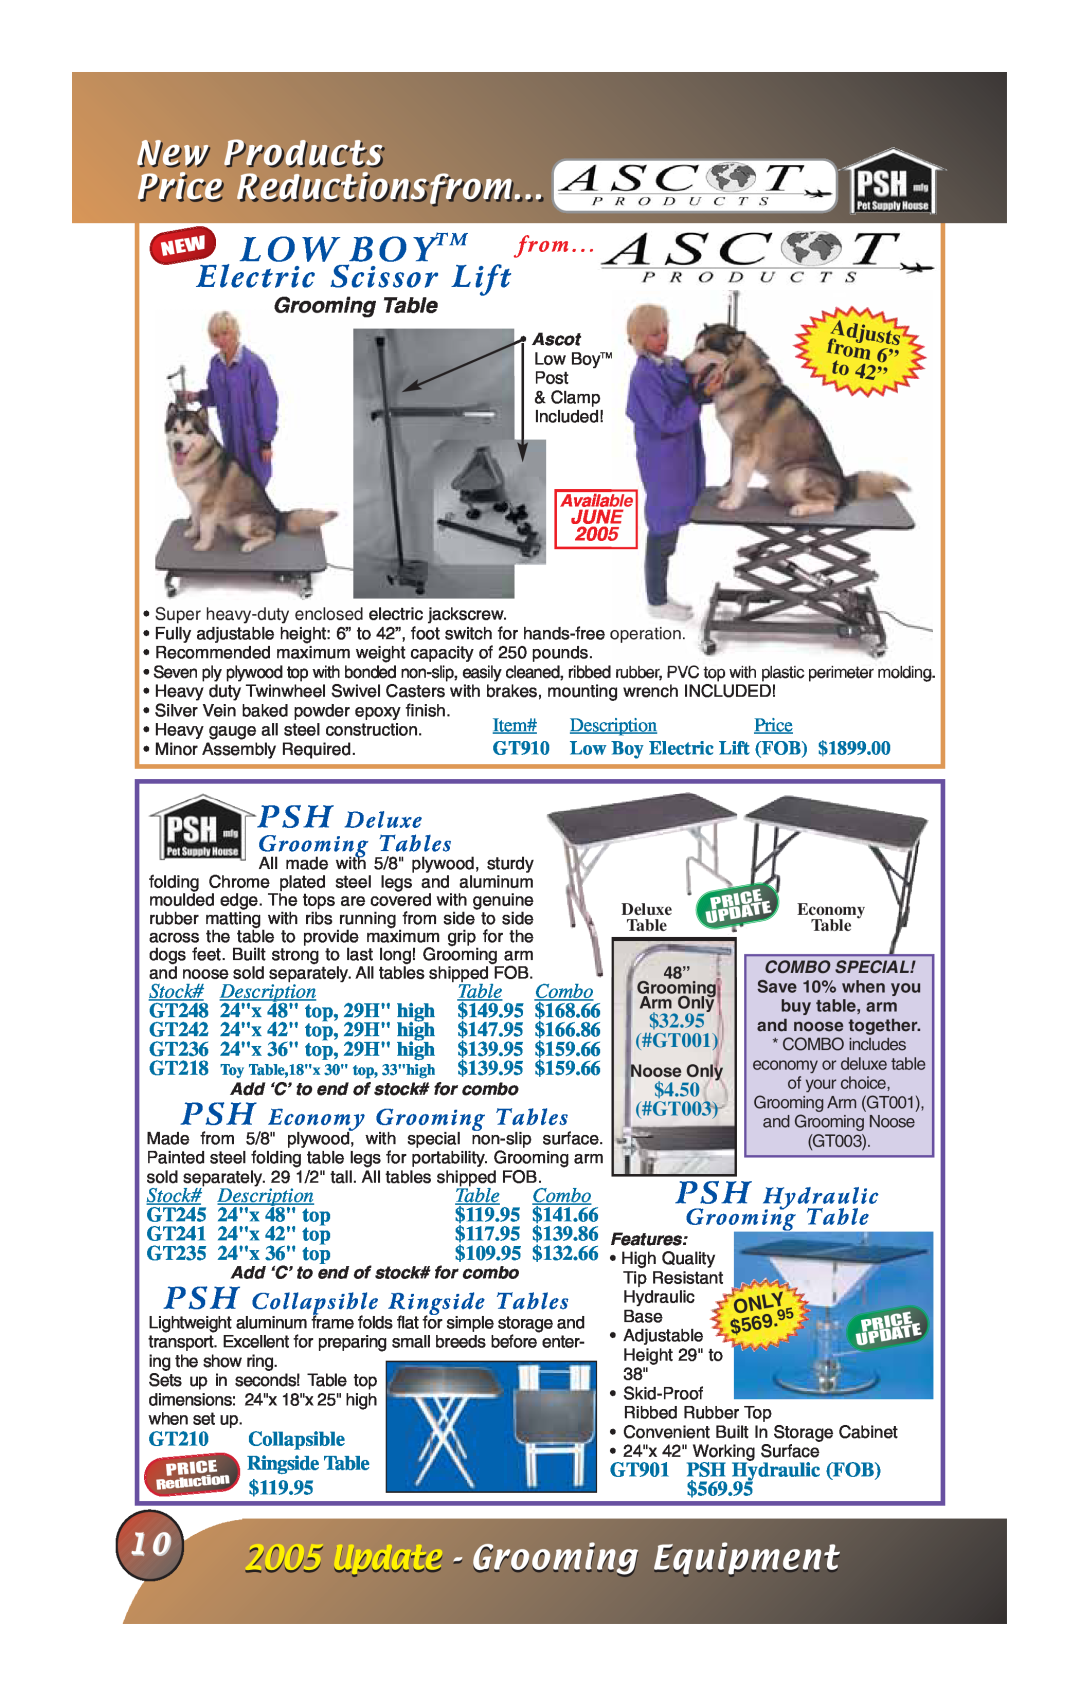 Petsafe EC245, EC216, EC242 Update - Grooming Equipment, PSH Deluxe, PSH Economy Grooming Tables, L O W B O Y, from 